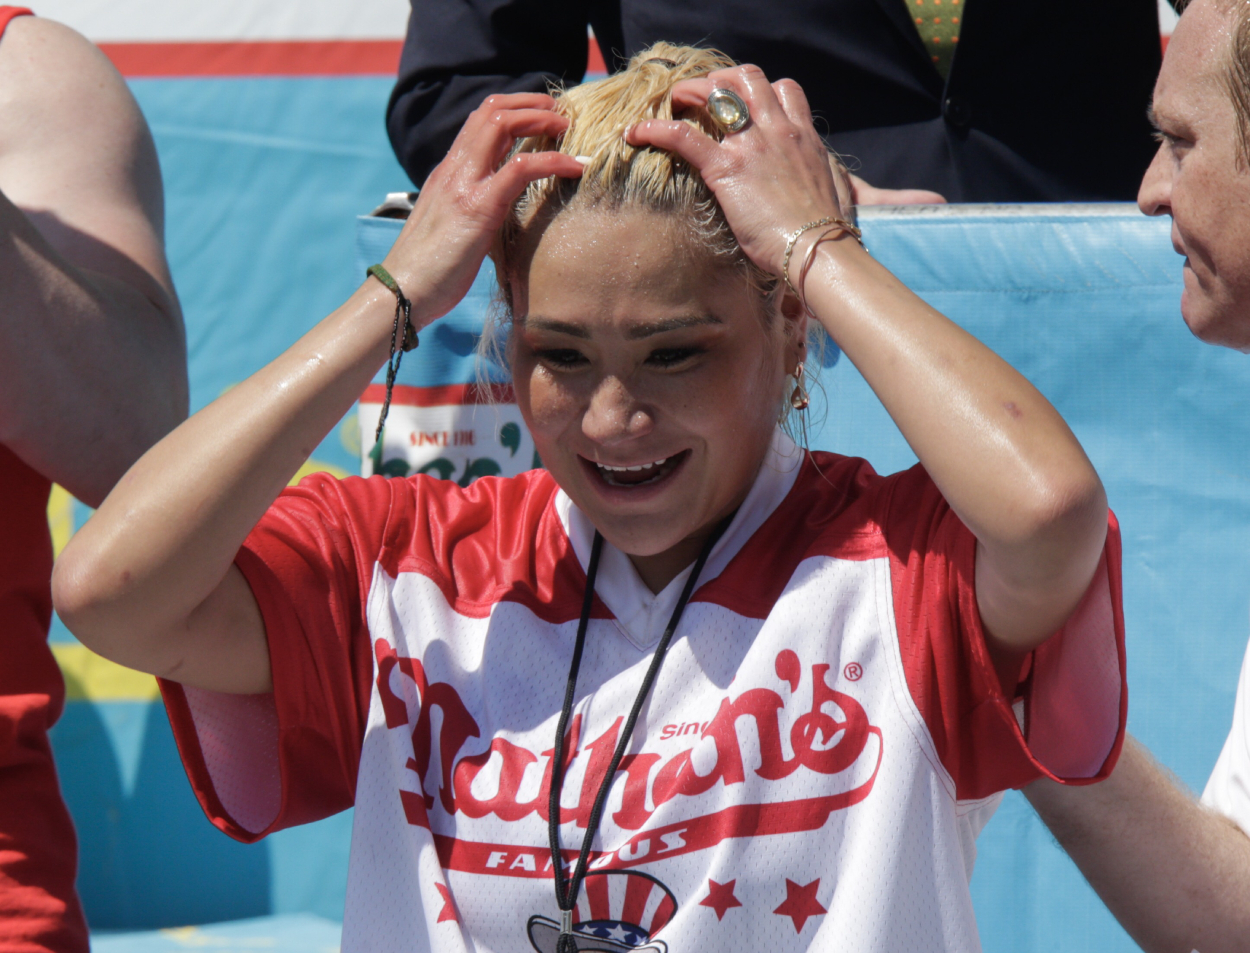 Miki Sudo reacts after winning the Nathan's Hot Dog Eating Contest in 2019